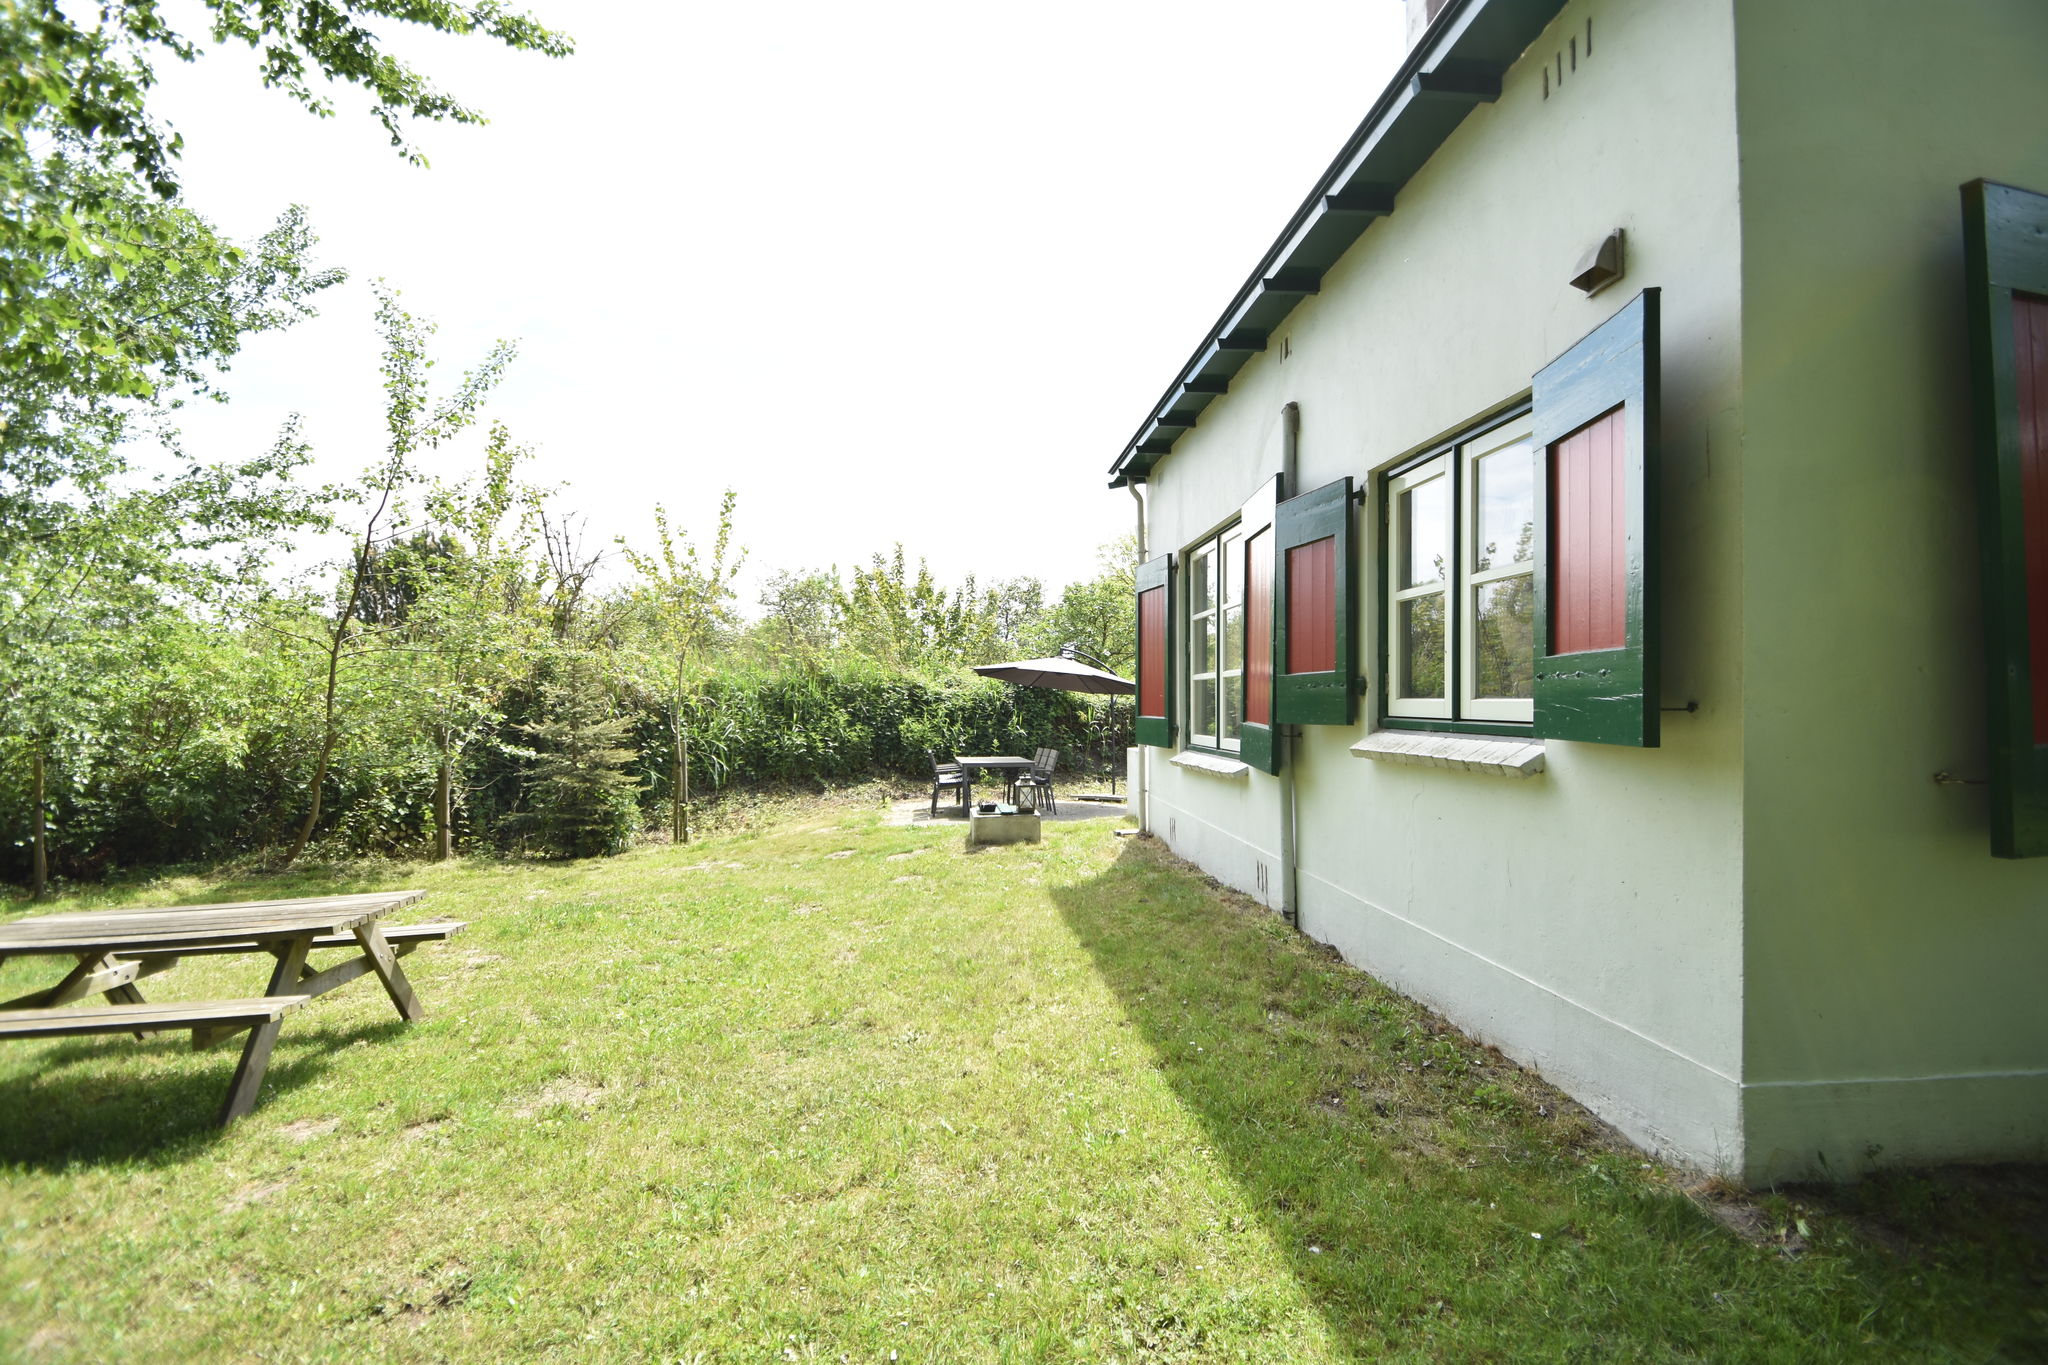 Quintessential holiday home in Ouddorp with garden